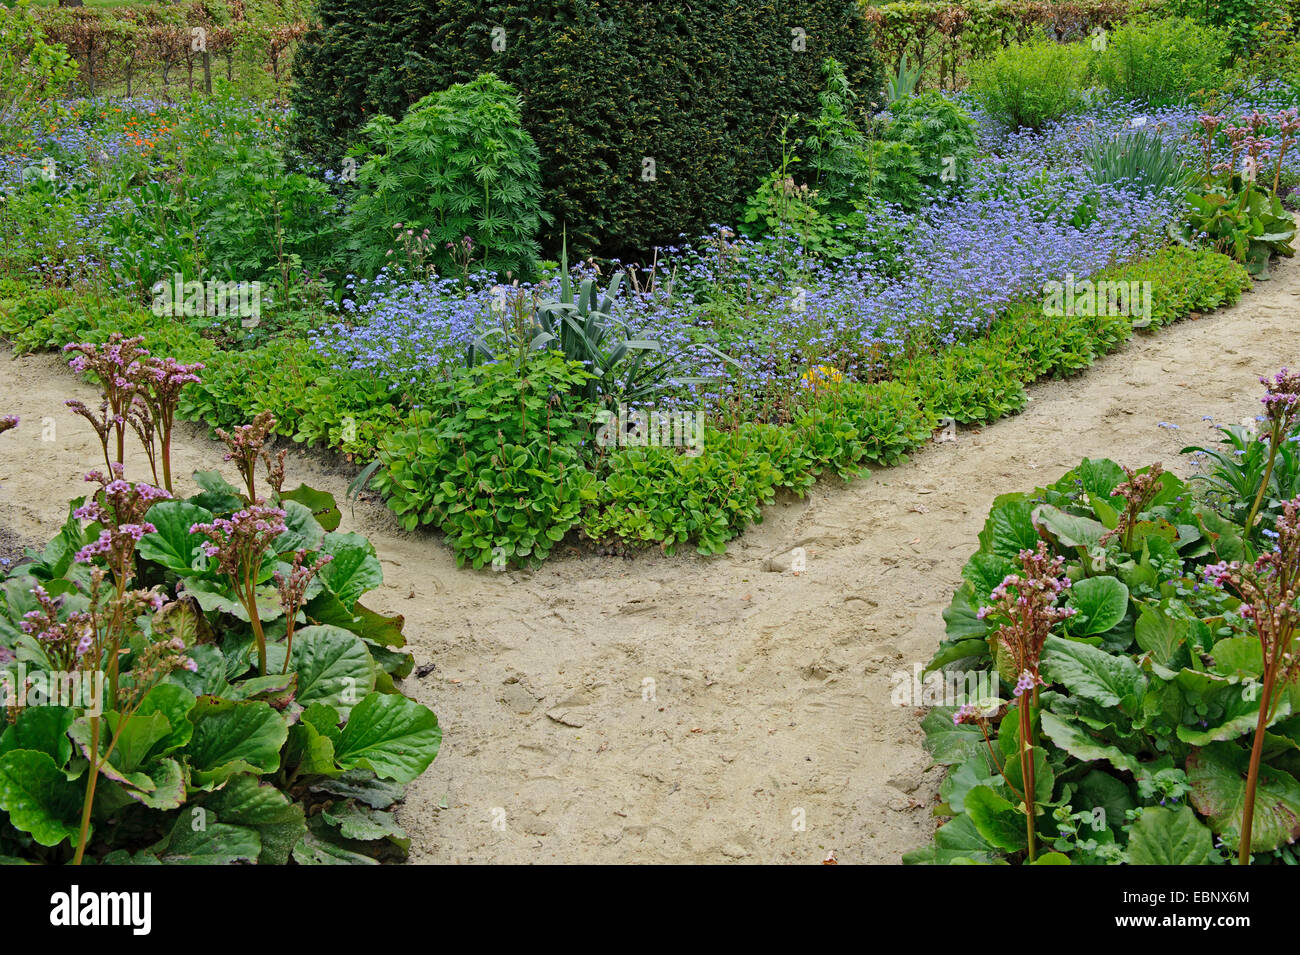 garden with a path in spring with forget-me-nots and bergenias, Germany Stock Photo